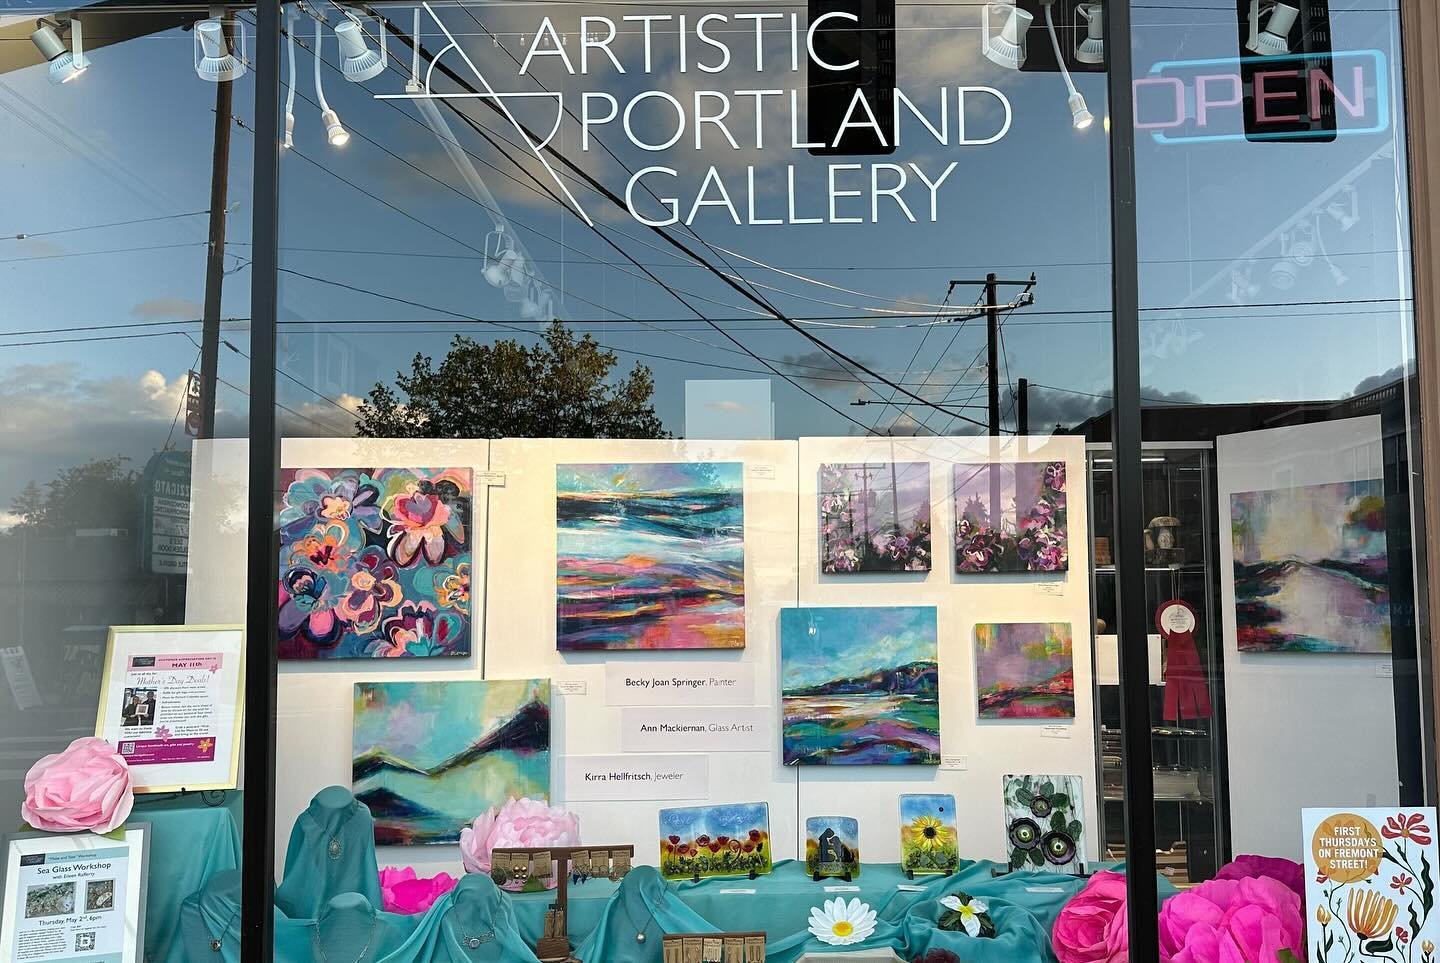 Hey hey hey! I&rsquo;m one of the featured artists in the @artisticportland window this month! 

You&rsquo;re invited to join us for First Thursdays on Fremont Street on 5/2 from 4-8pm. Have a beverage, listen to live music, see the new display, meet